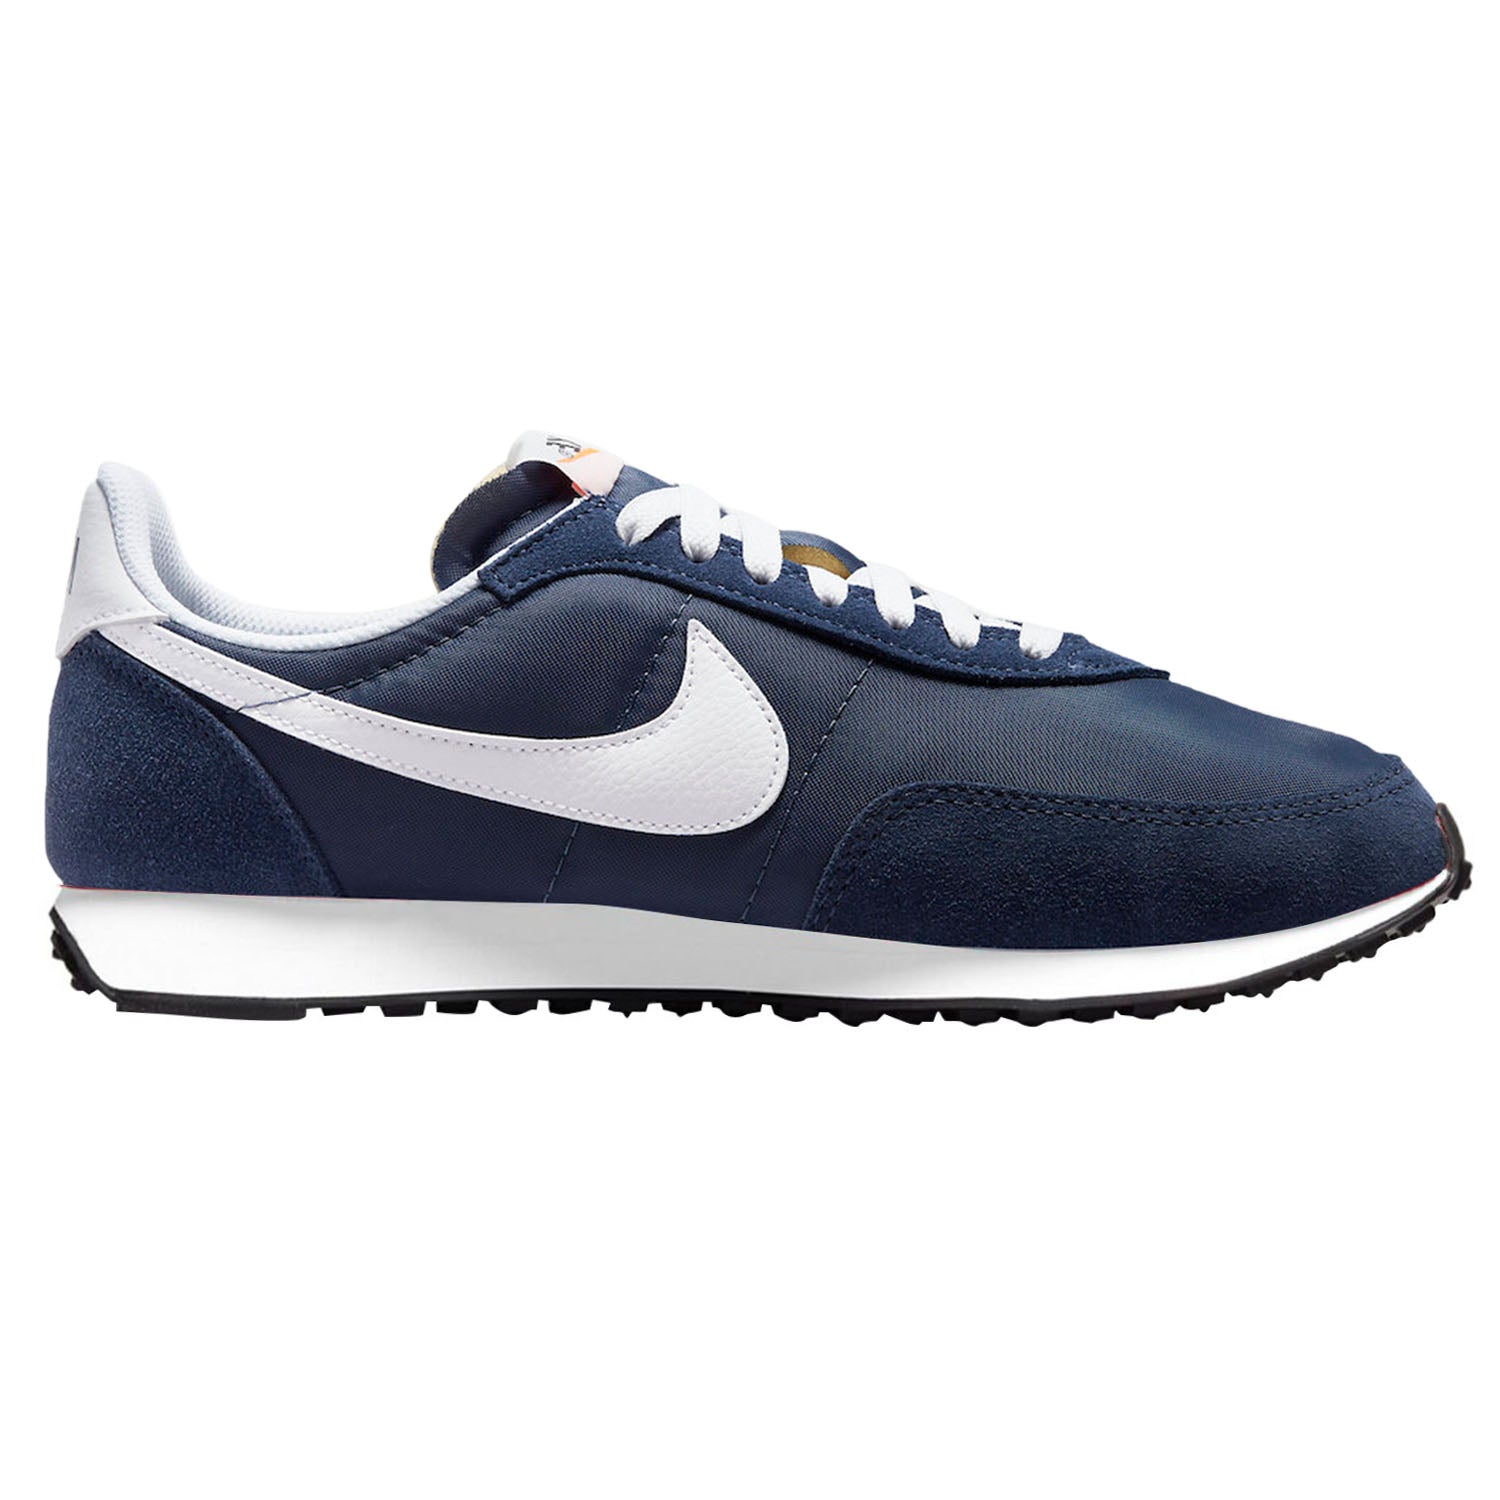 Nike Waffle Trainer 2 Mens Style : Dh1349-401